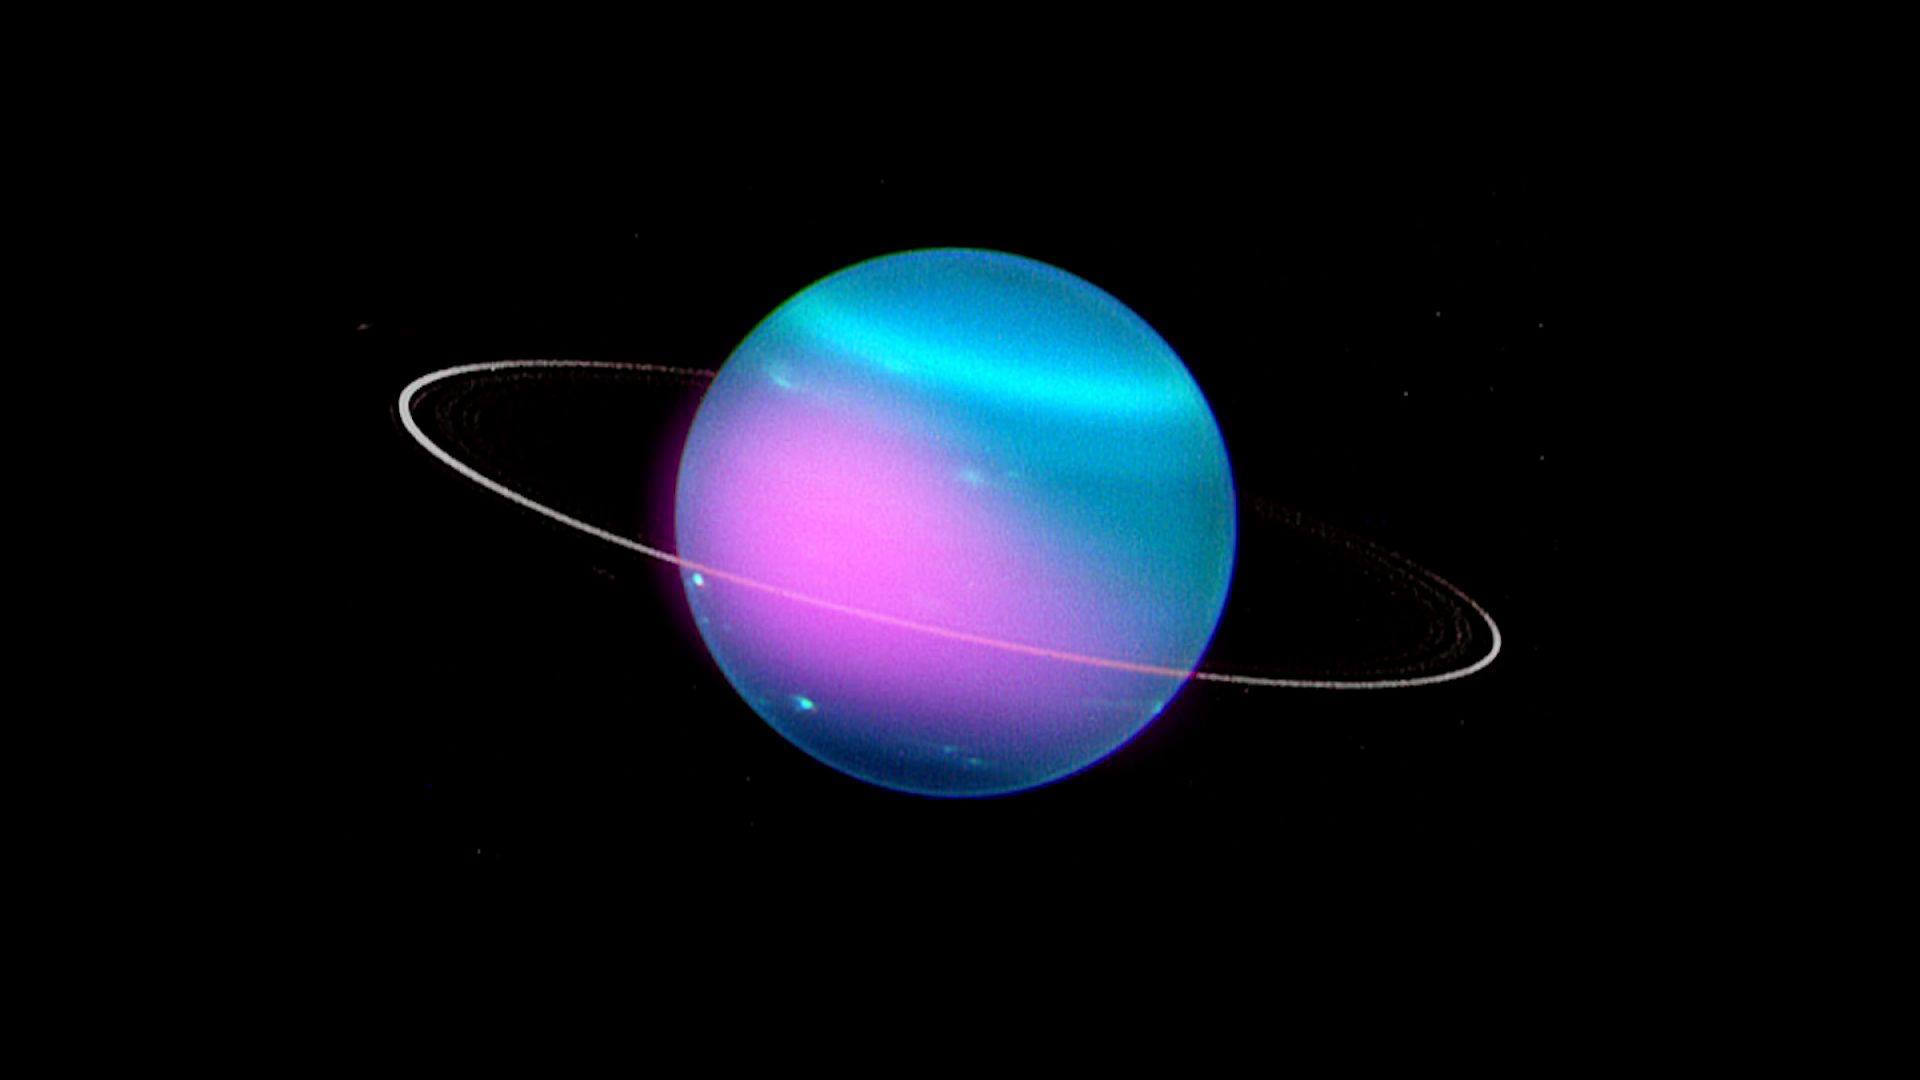 Scientists discover X-rays coming from Uranus for the first time | CNN